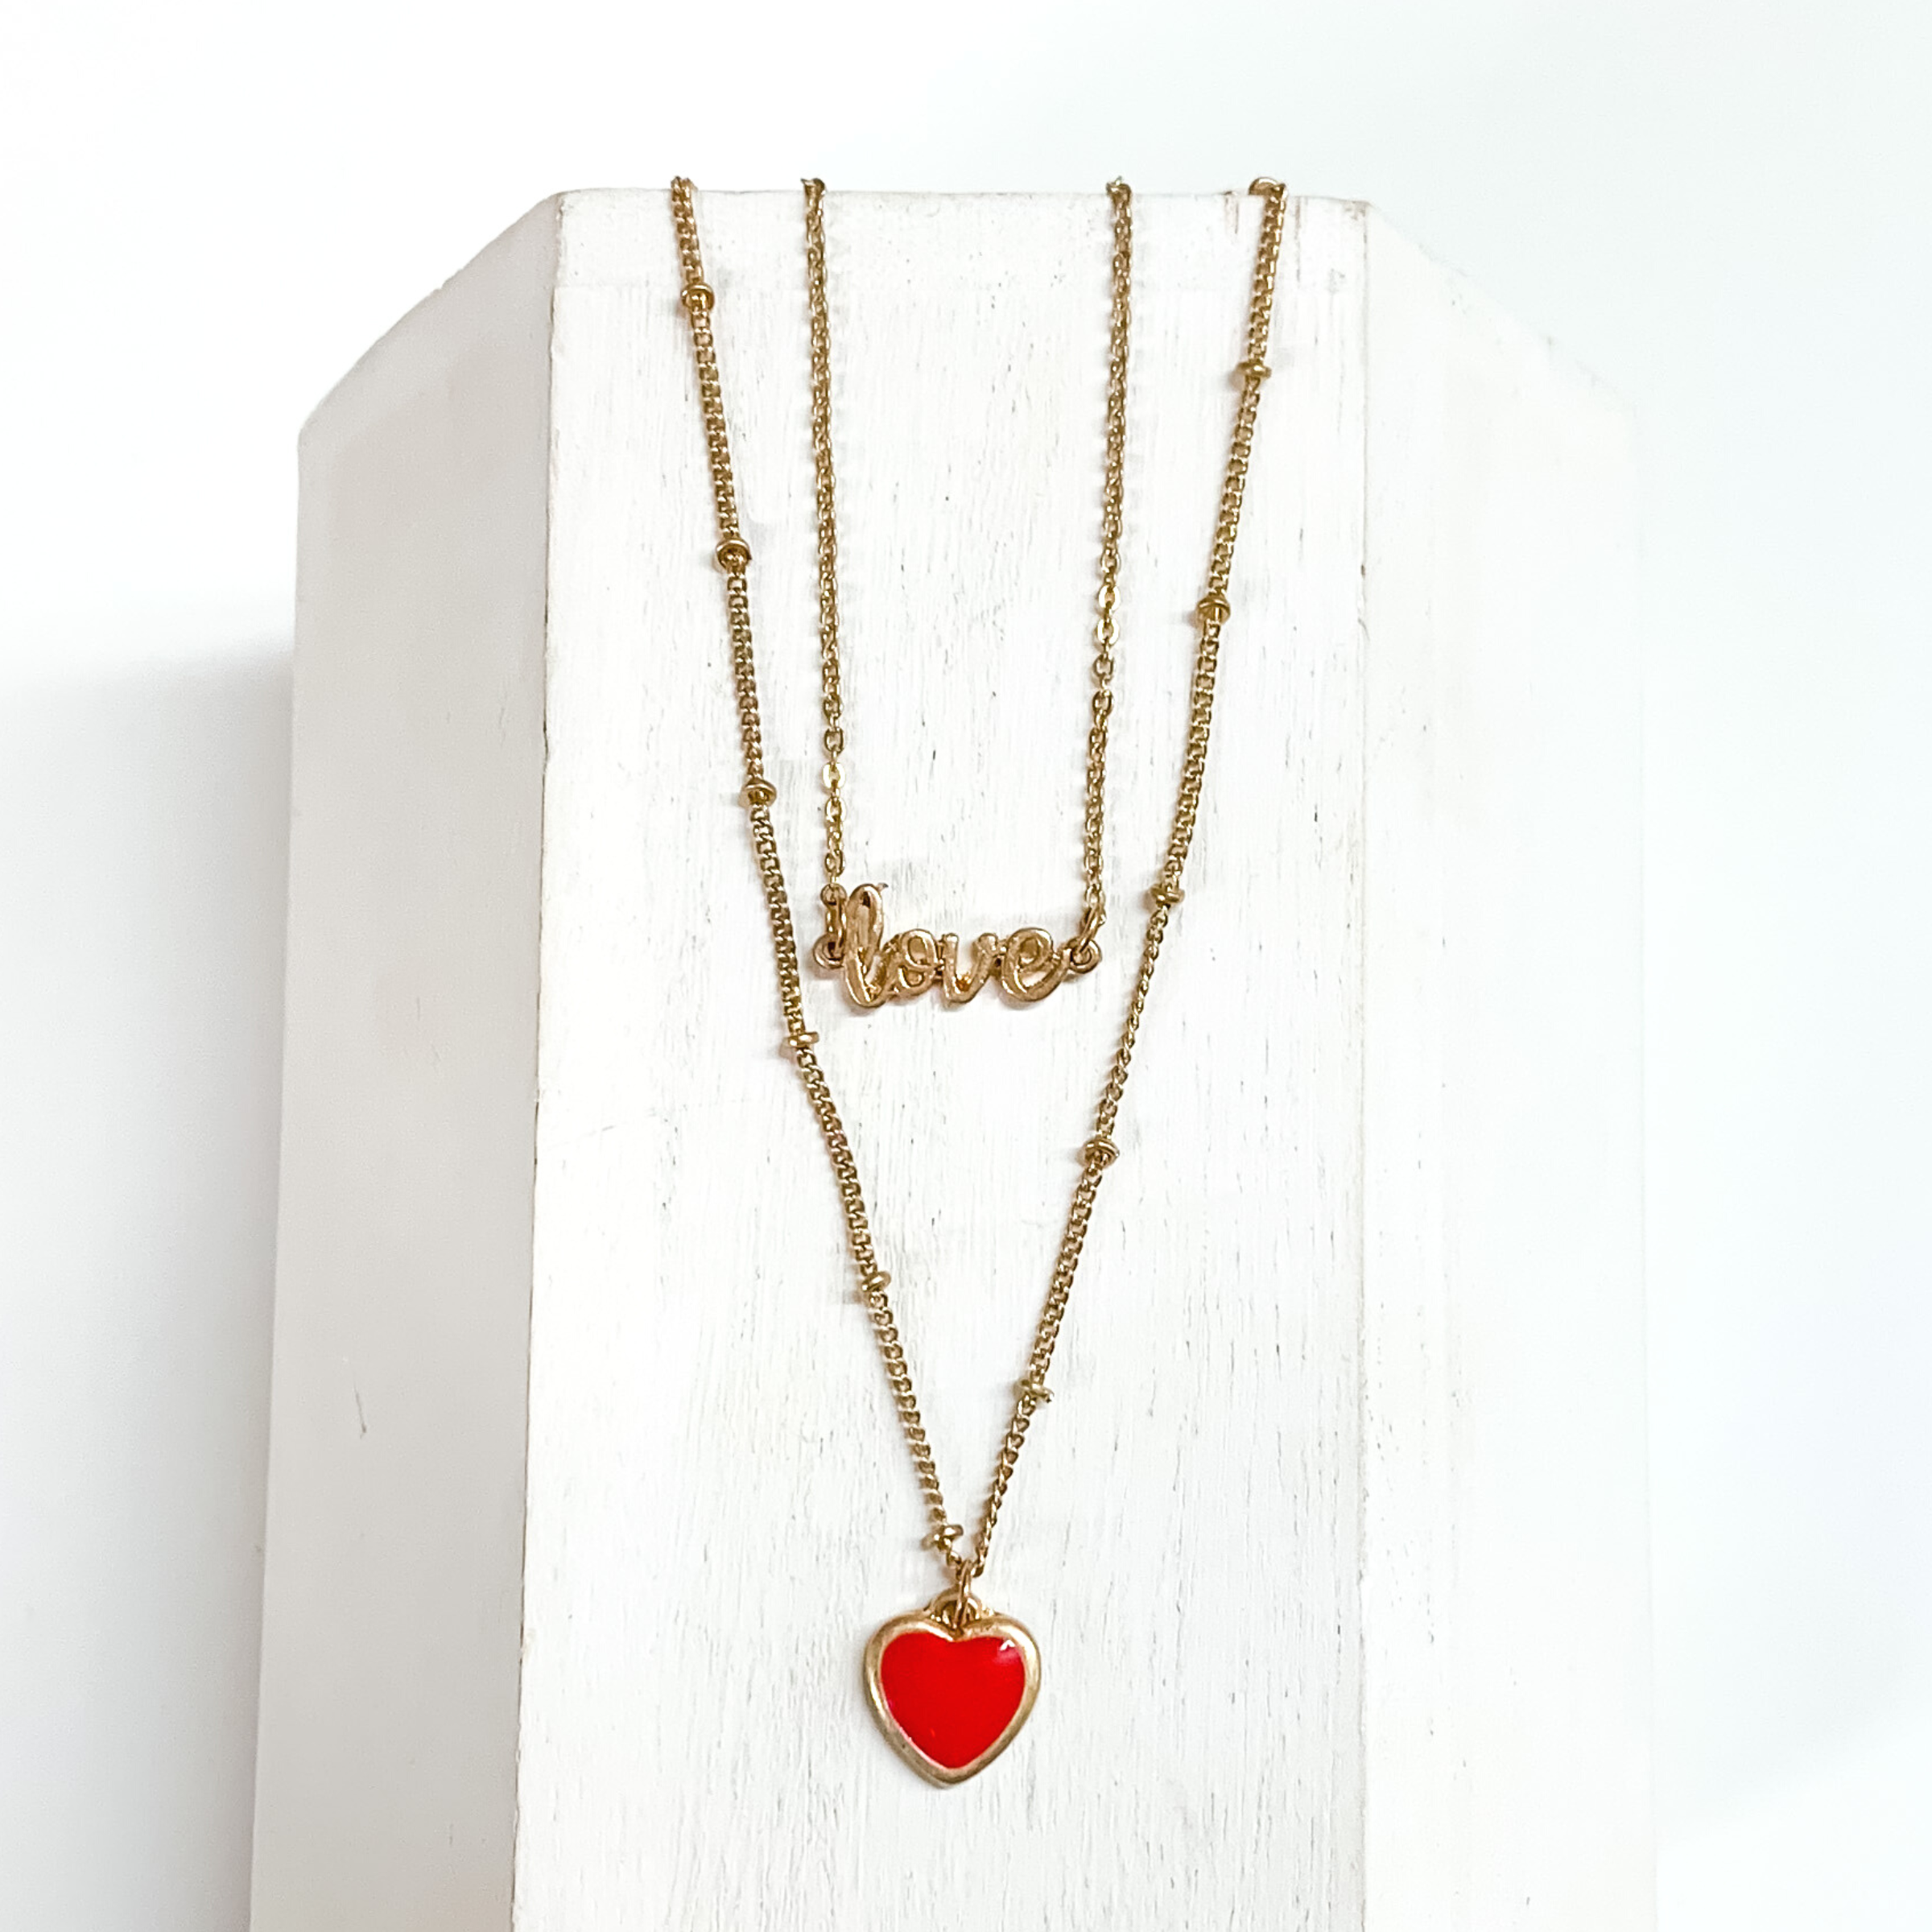 Two stranded gold chained necklace. The shorter strand has a gold pendant that spells out "LOVE" and the longer strand has a small red heart charm. This necklace is pictured laying on a white block on a white background.